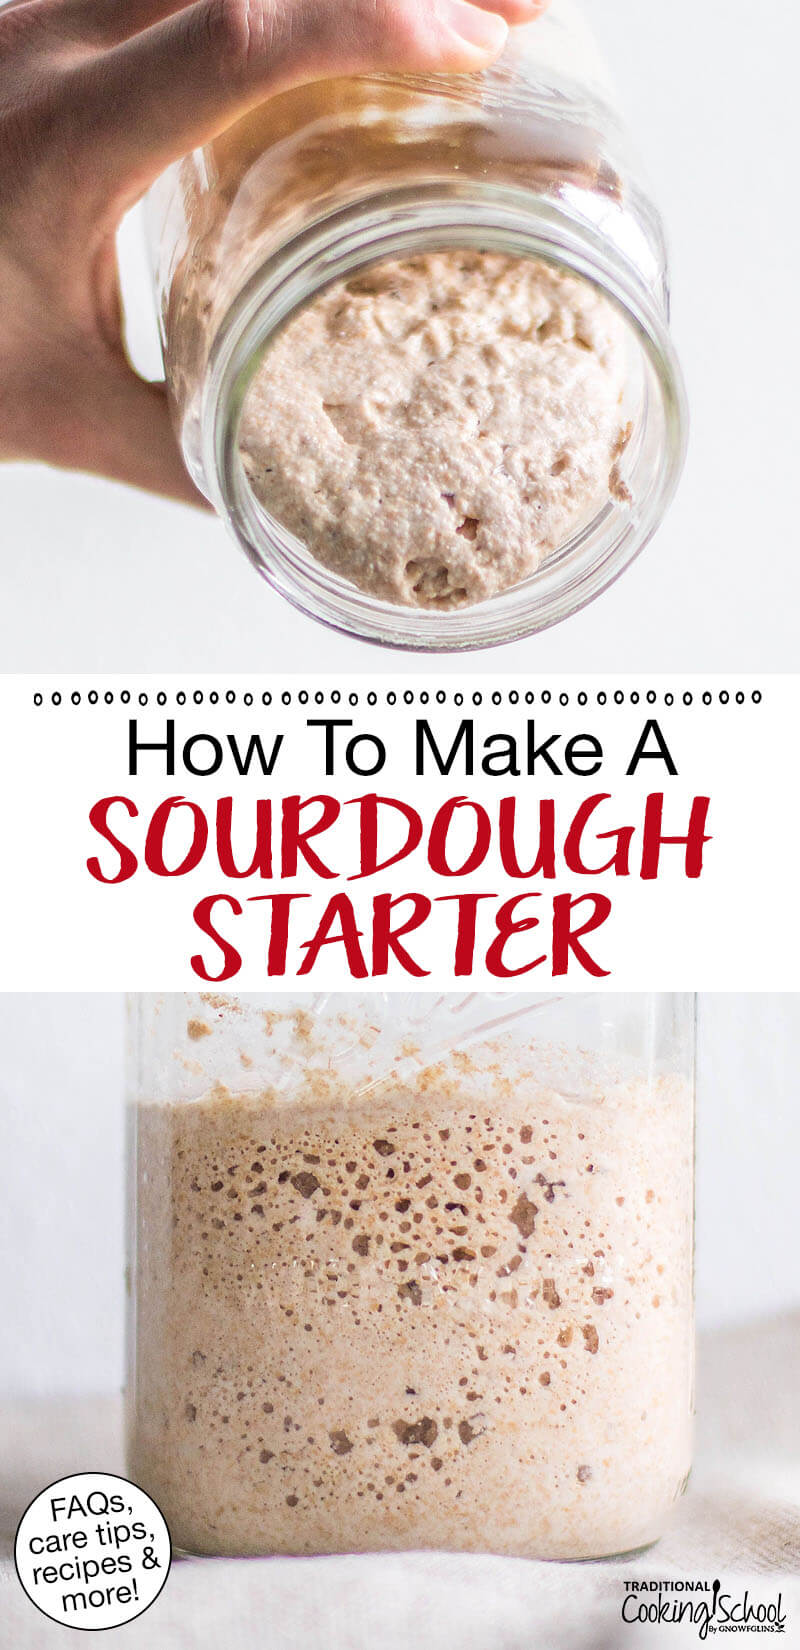 Photo collage of bubbly sourdough starter. Text overlay says: "How To Make A Sourdough Starter (FAQs, care tips, recipes & more!)"